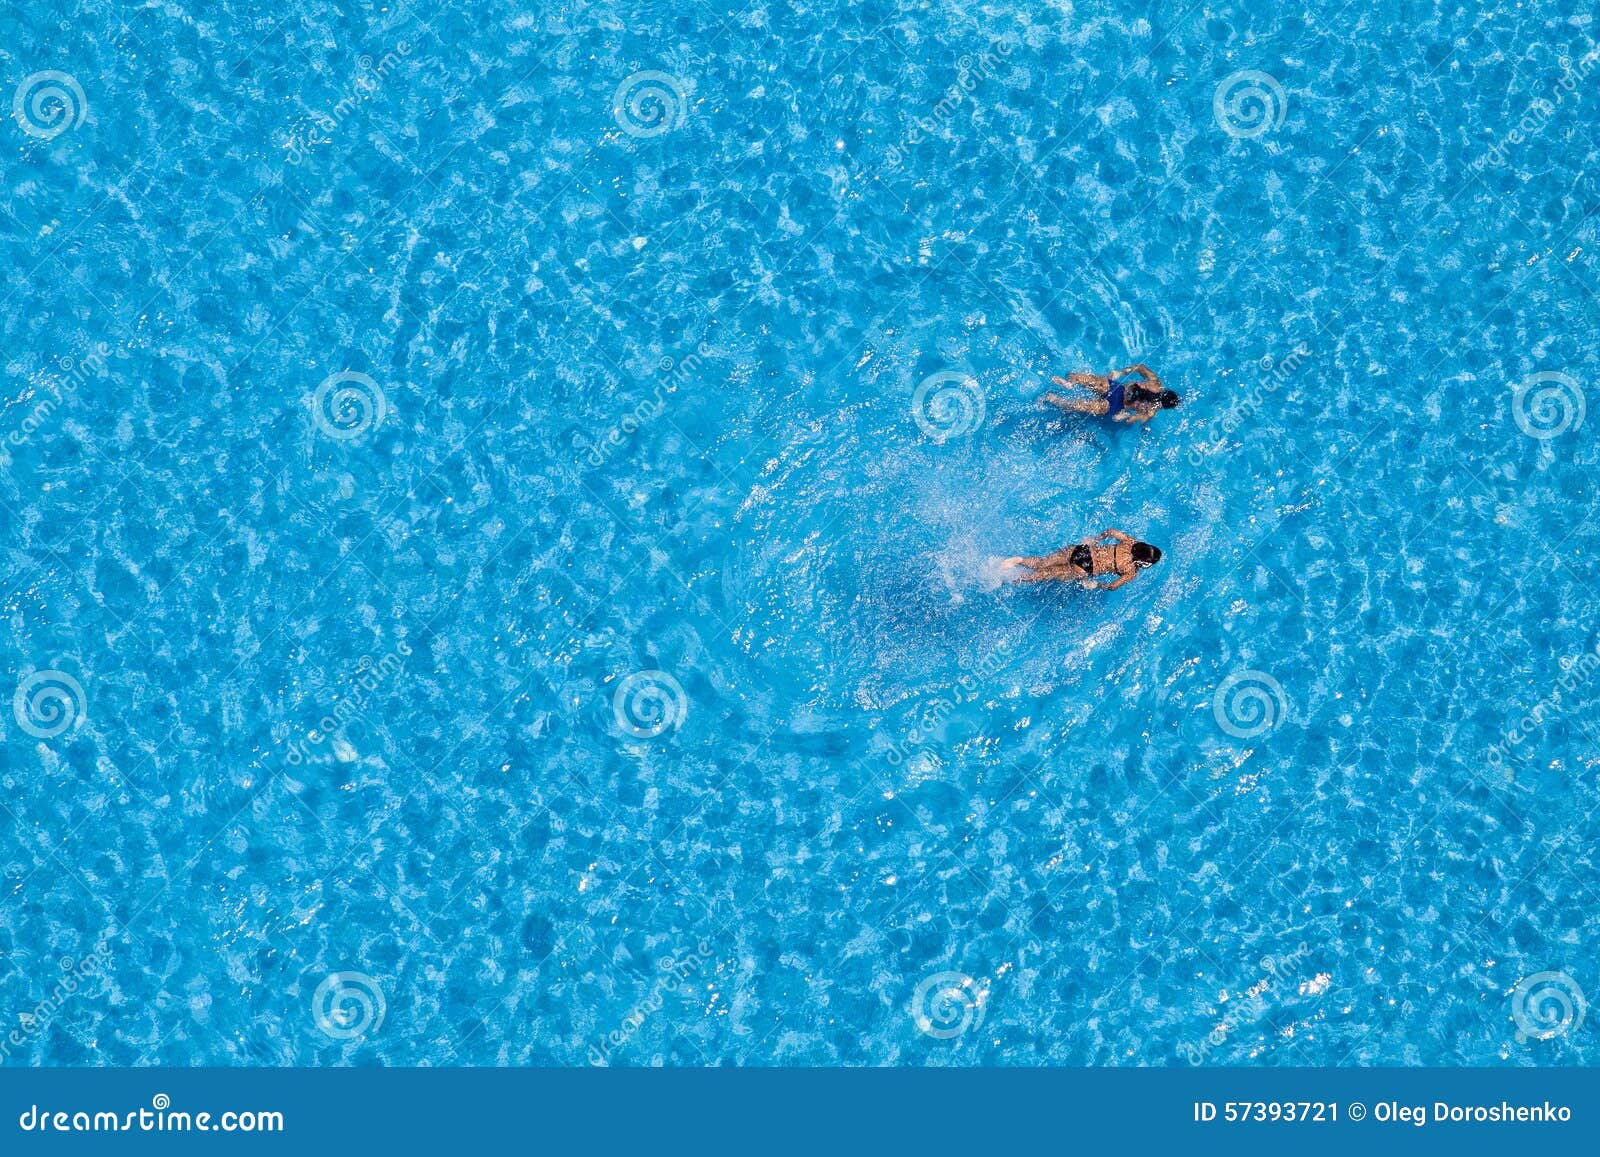 Aerial View of a Two Girls Swimming in the Pool Stock Image - Image of ...